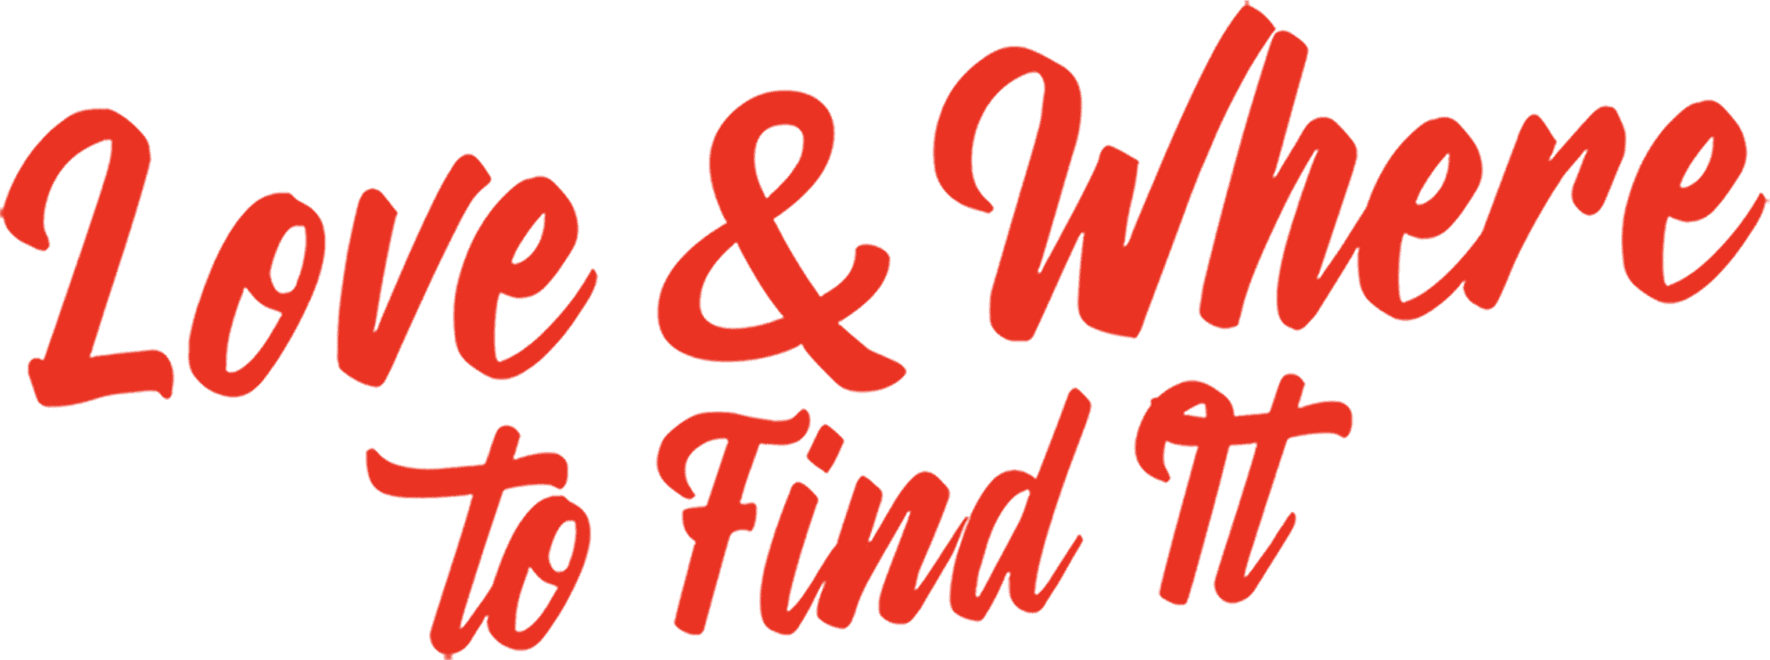 Love & Where to Find It logo